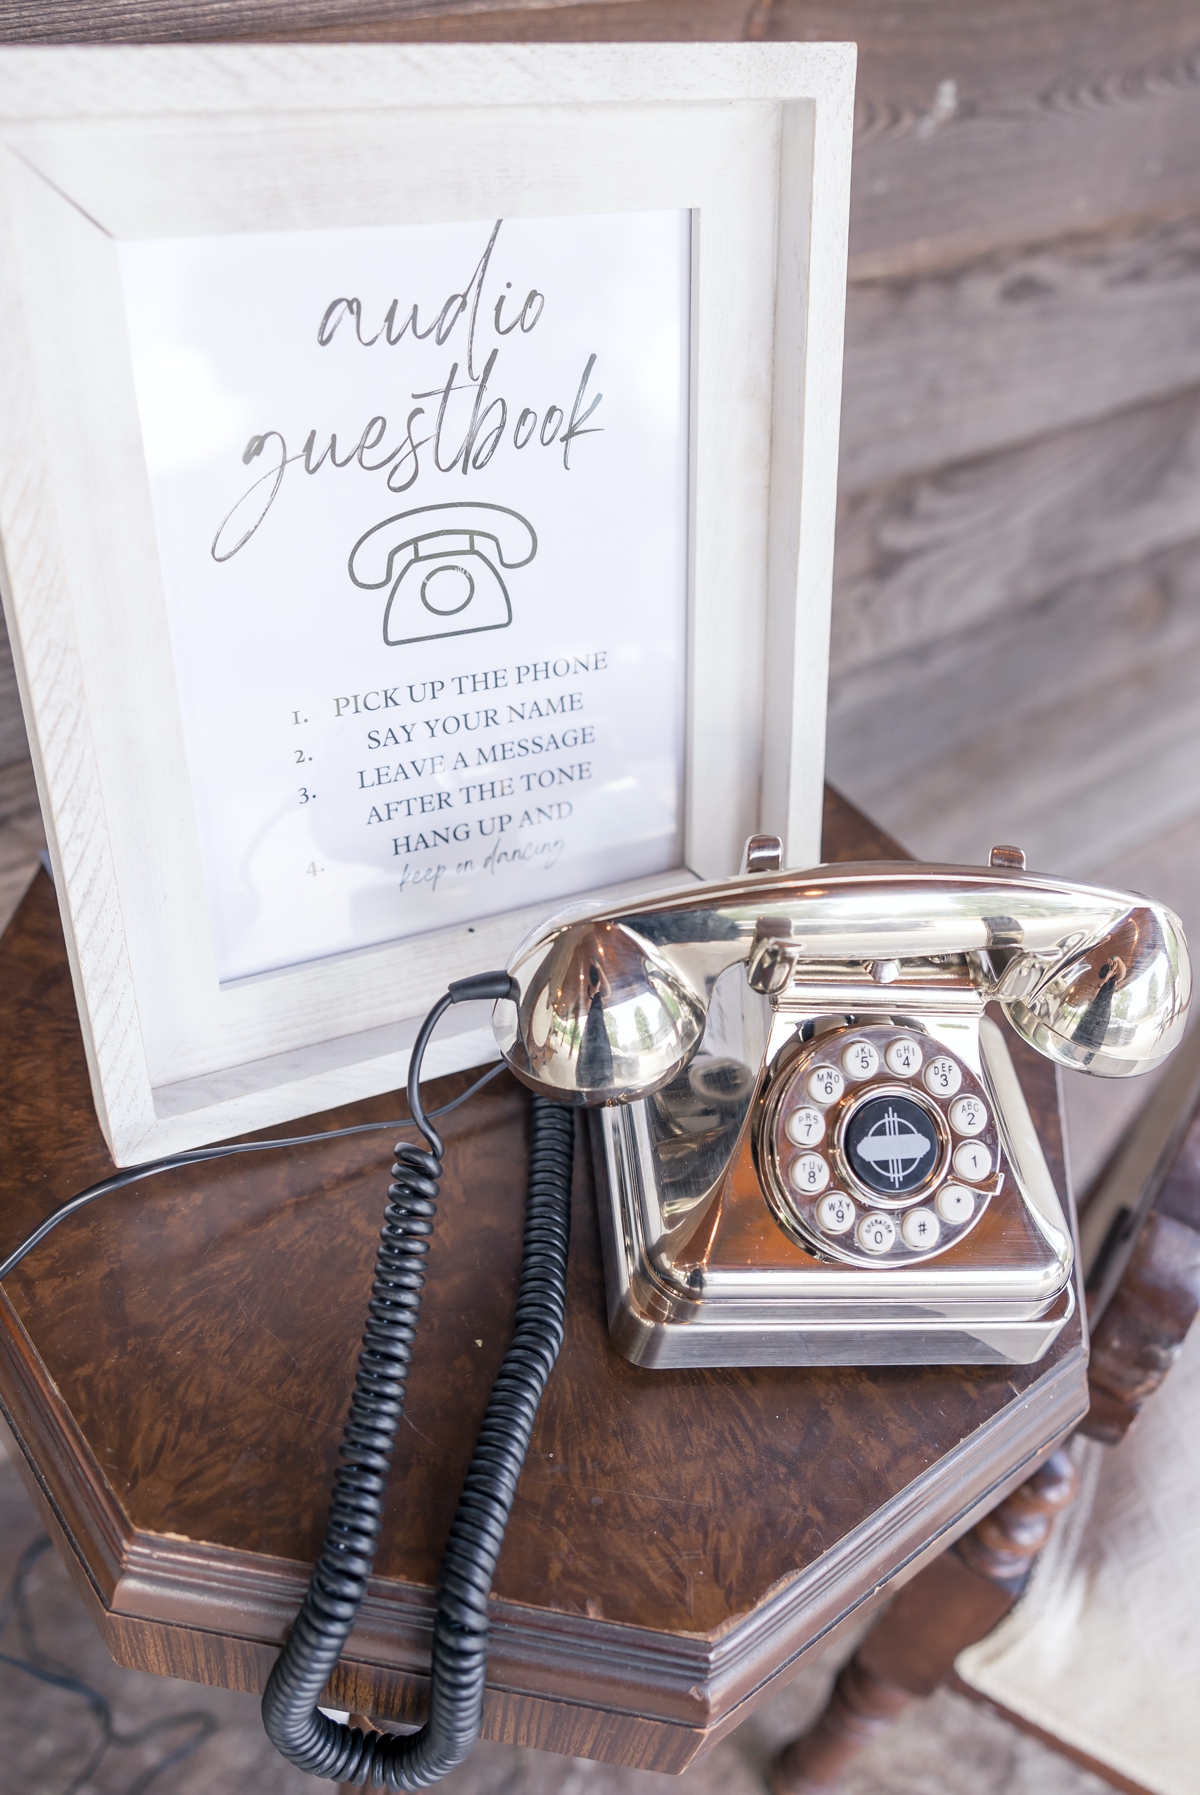 A rotary phone guestbook sitting on a table for Chris and Grace's wedding.